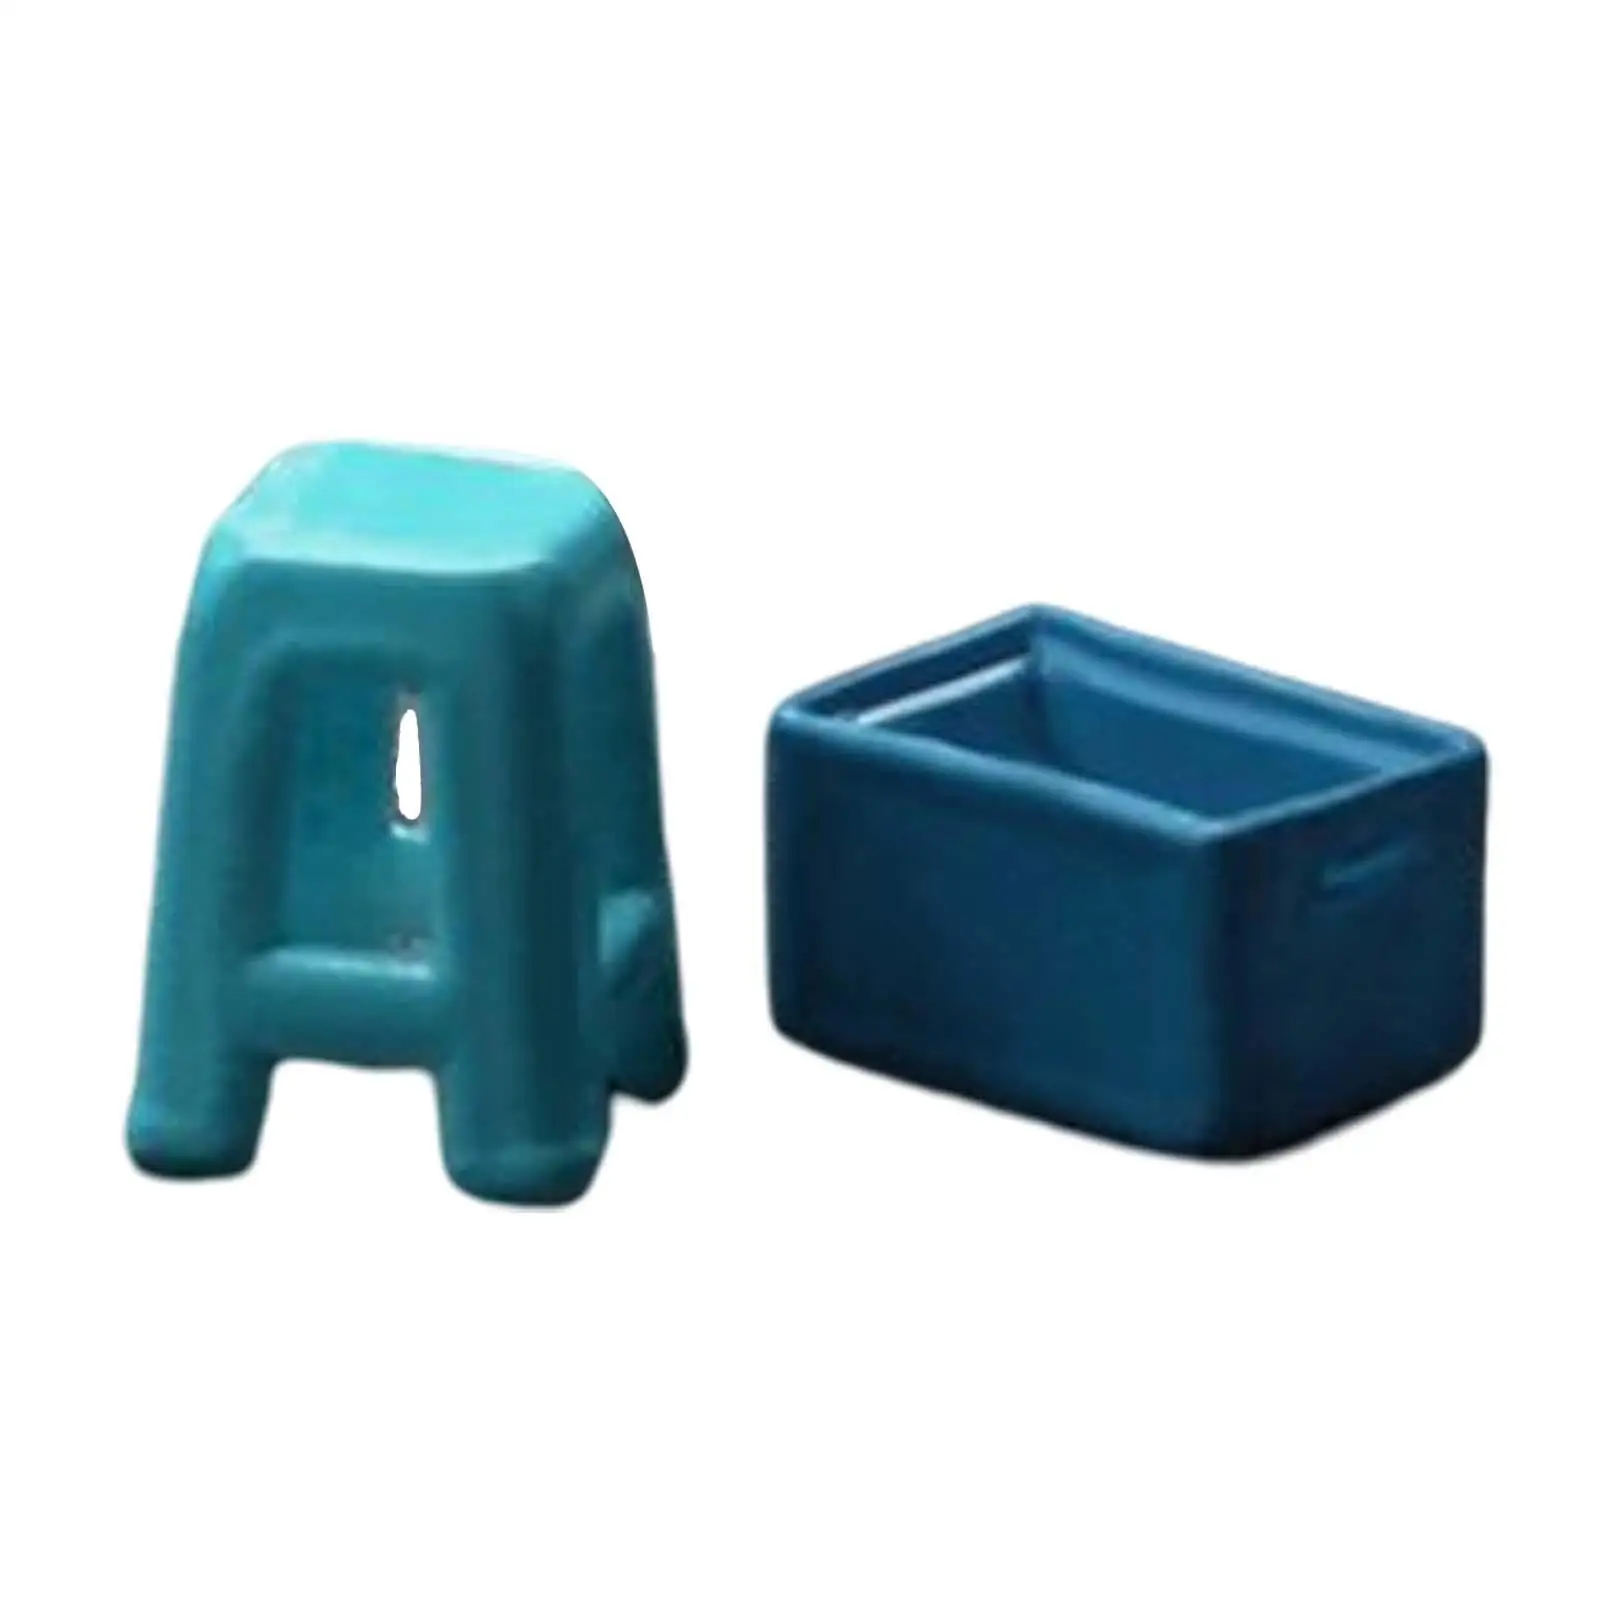 1/64 Tiny Chairs Resin 1/64 Scale Painted Stool for Sand Table Decoration Miniature Scenes Decor Photo Prop Desktop Decoration